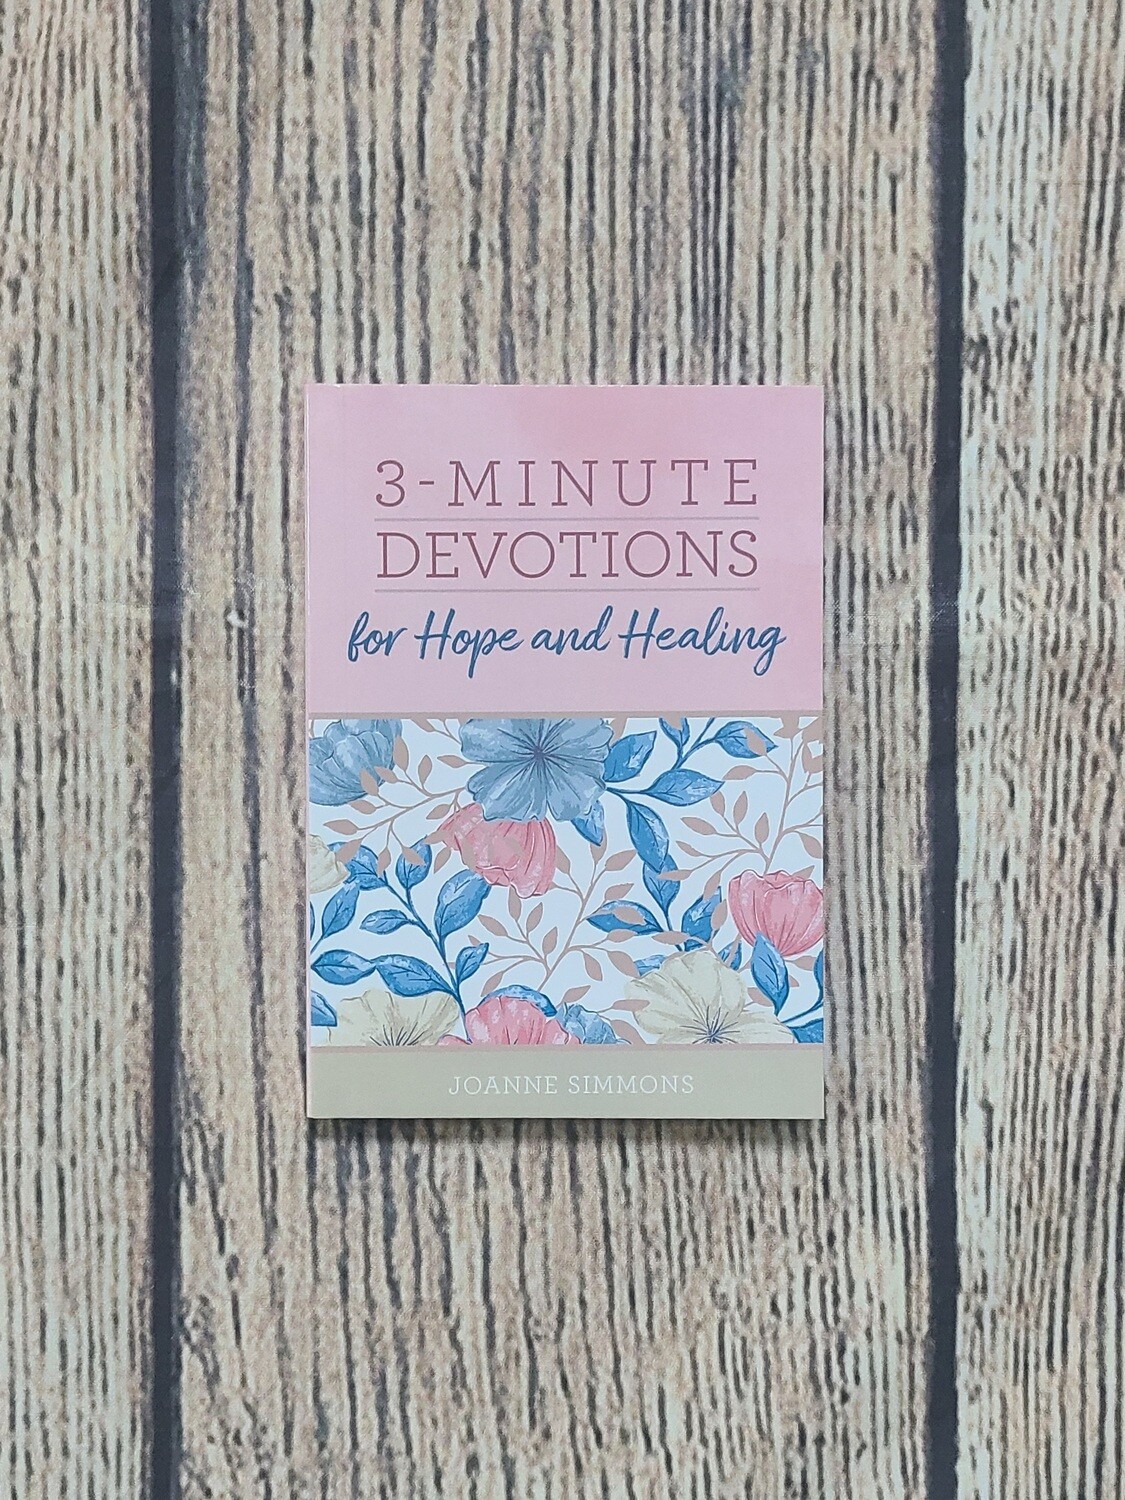 3-Minute Devotions for Hope and Healing by Joanne Simmons - Paperback - New